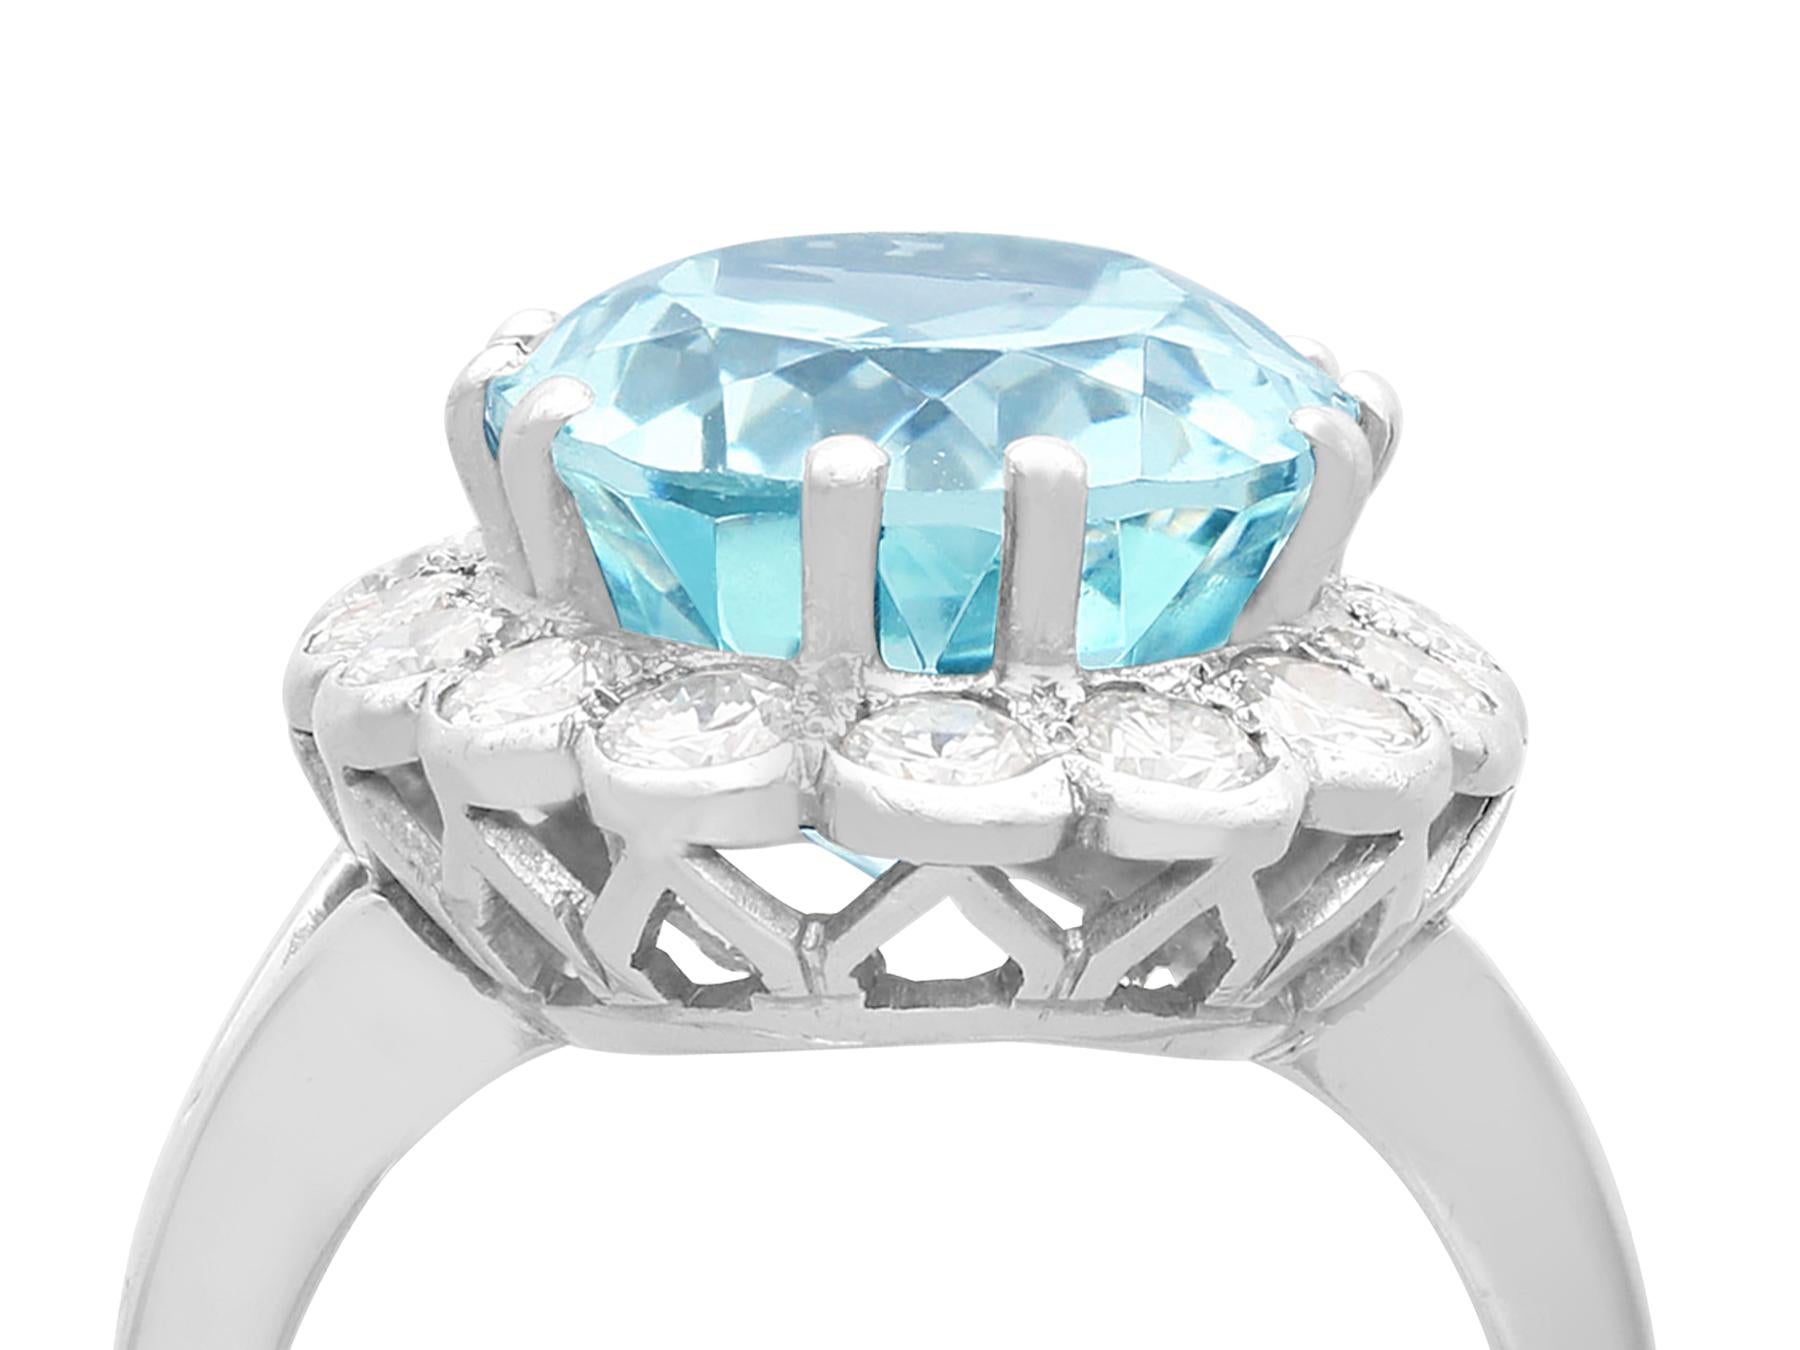 A fine and impressive vintage 7.65 carat aquamarine and 1.02 carat diamond, 18 karat white gold dress ring; part of our diverse antique jewelry and estate jewelry collections.

This fine and impressive vintage aquamarine and diamond ring has been